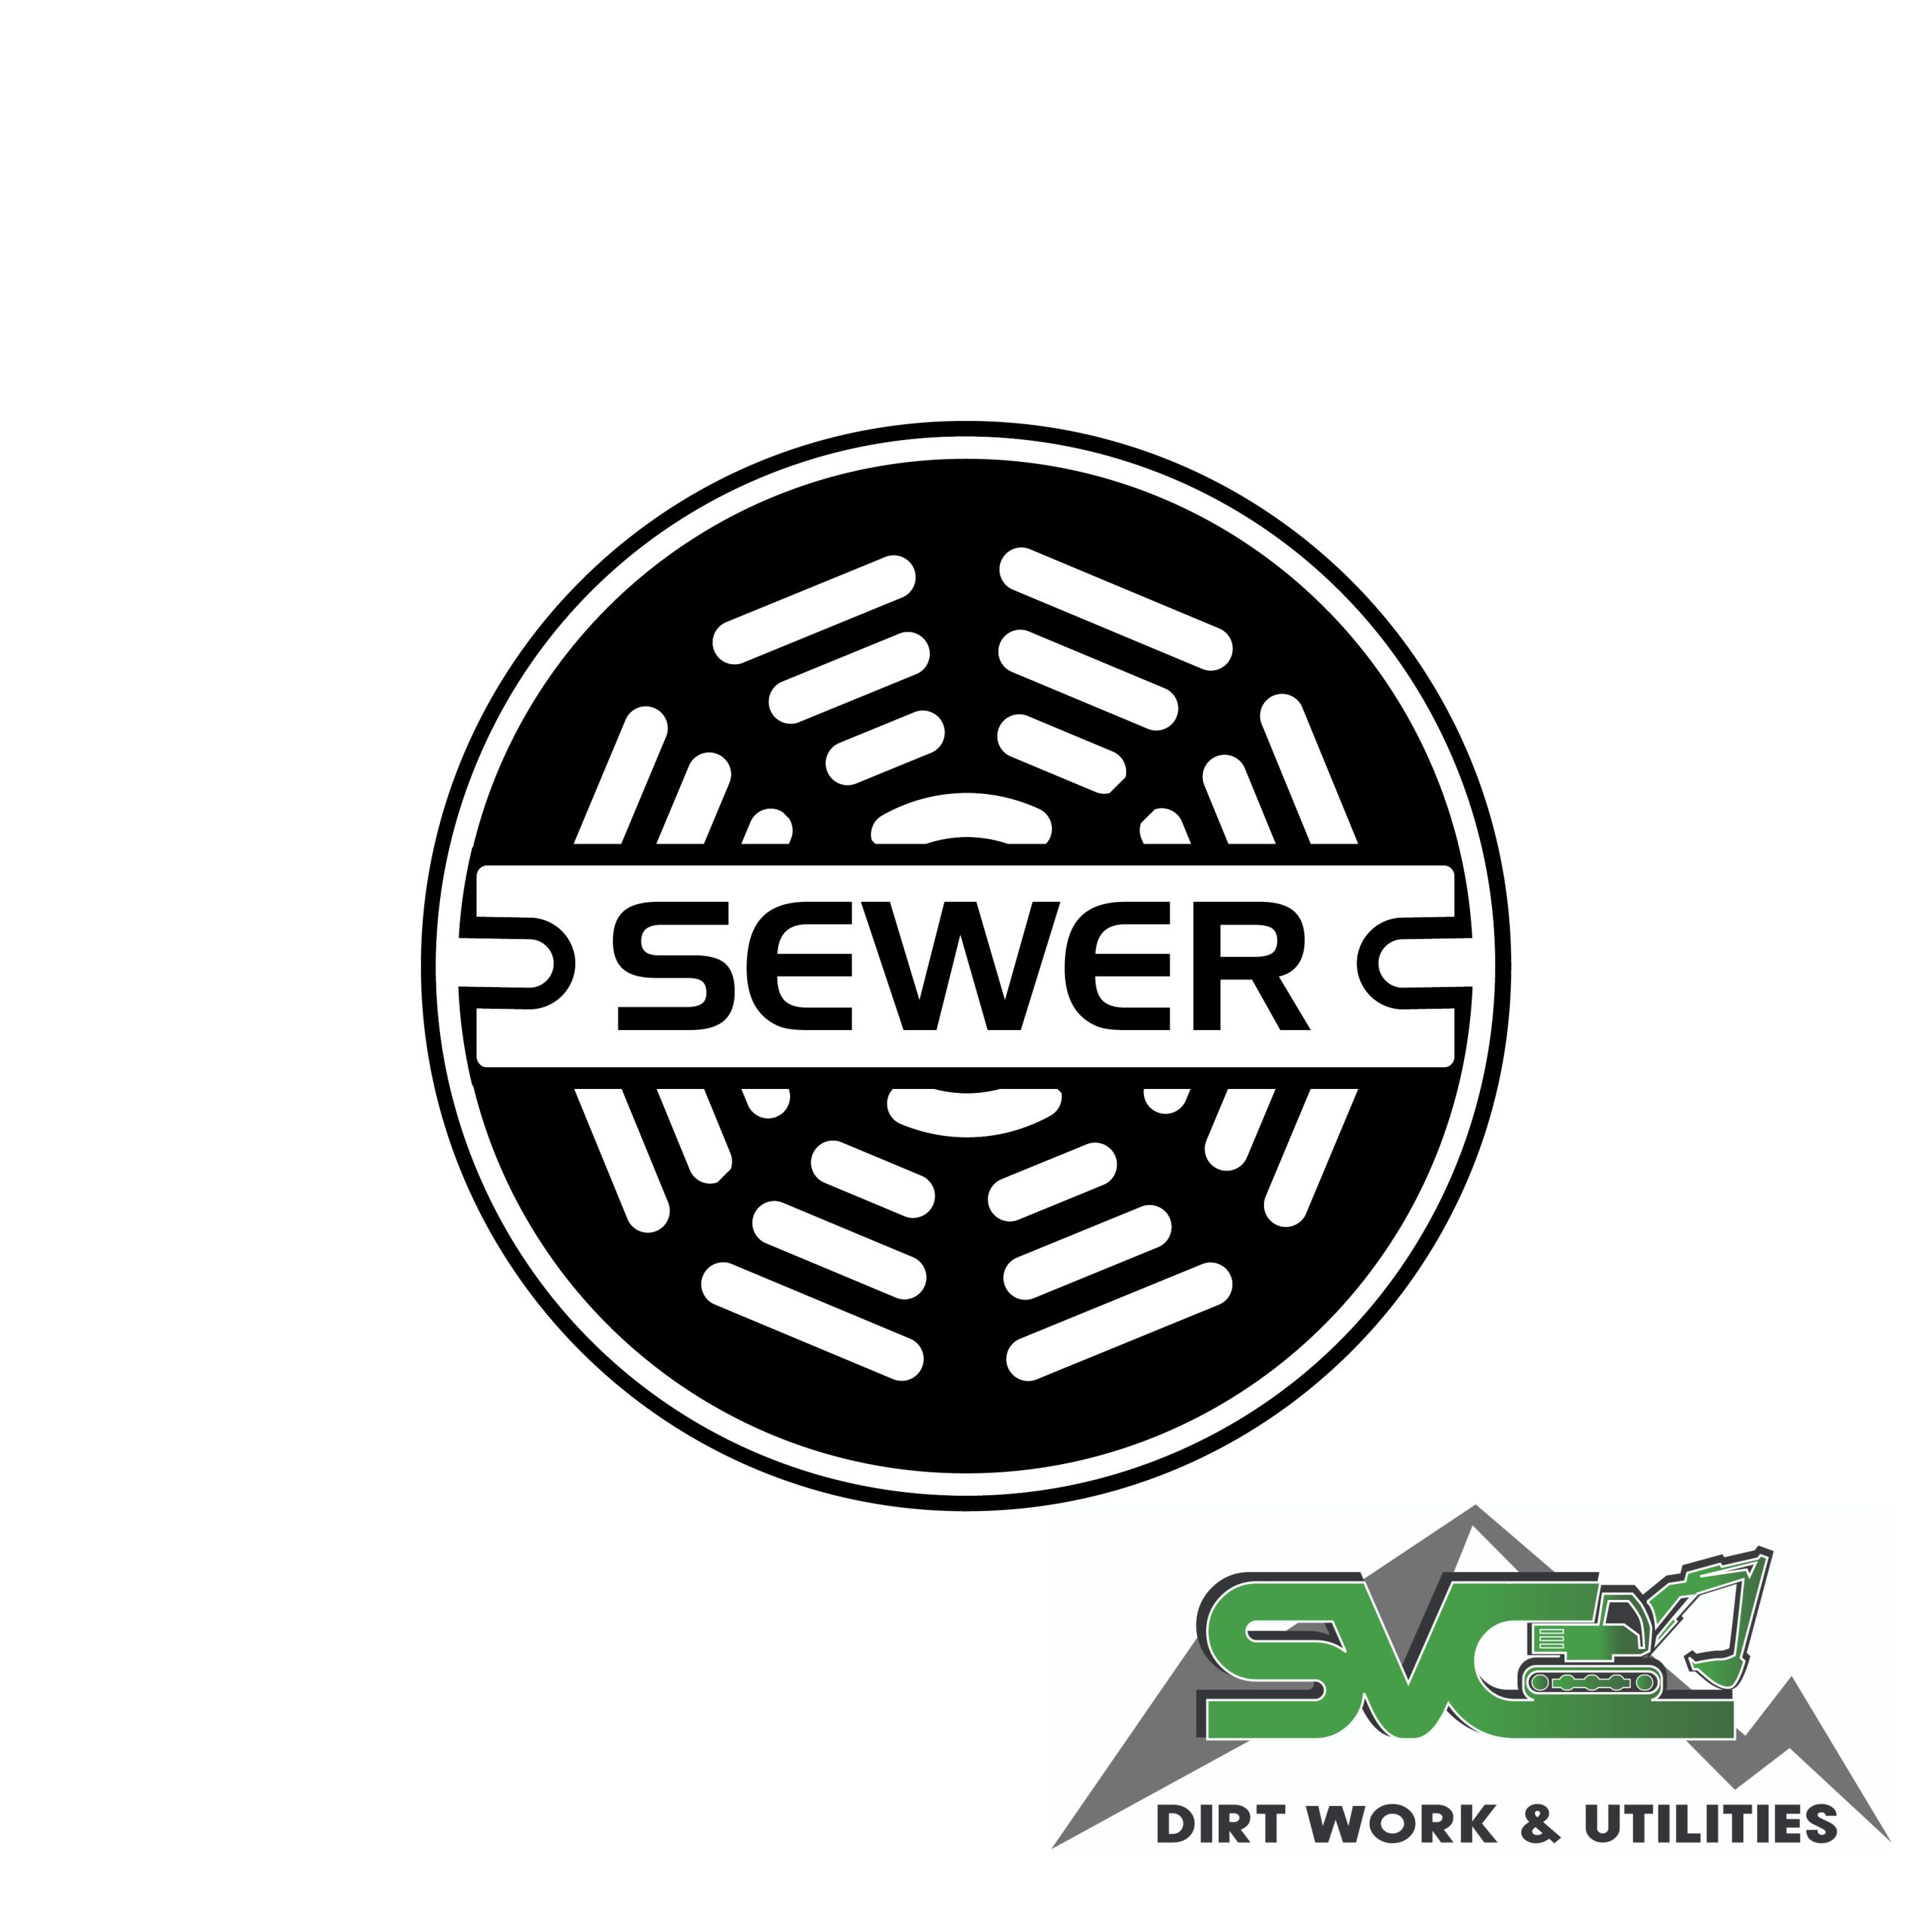 Stanwood Property Owners - We Can Handle Your Sewer Installation Needs